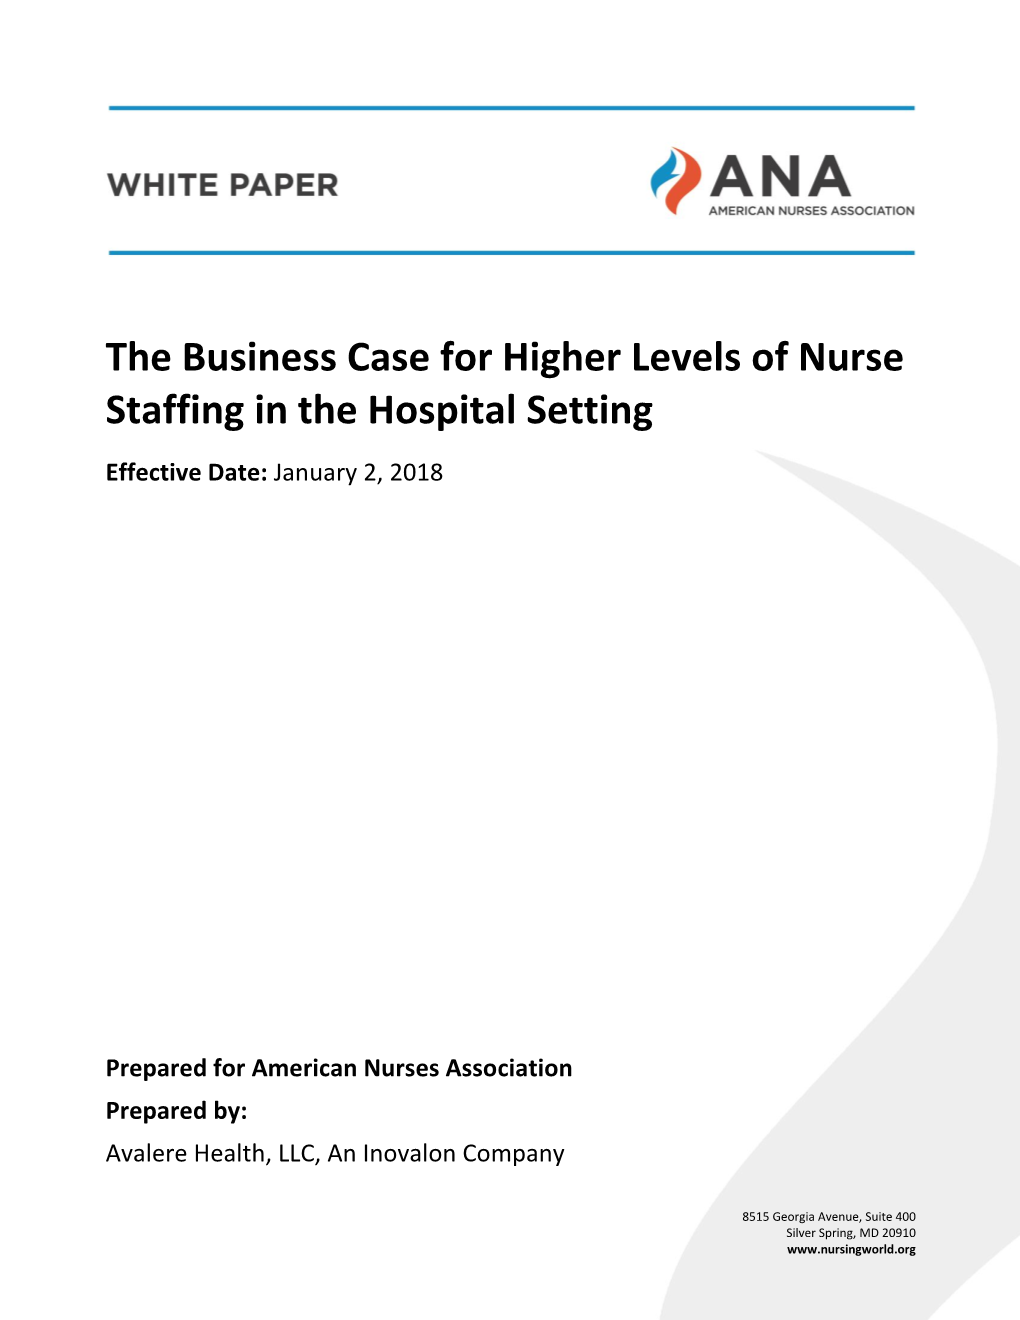 The Business Case for Higher Levels of Nurse Staffing in the Hospital Setting Effective Date: January 2, 2018